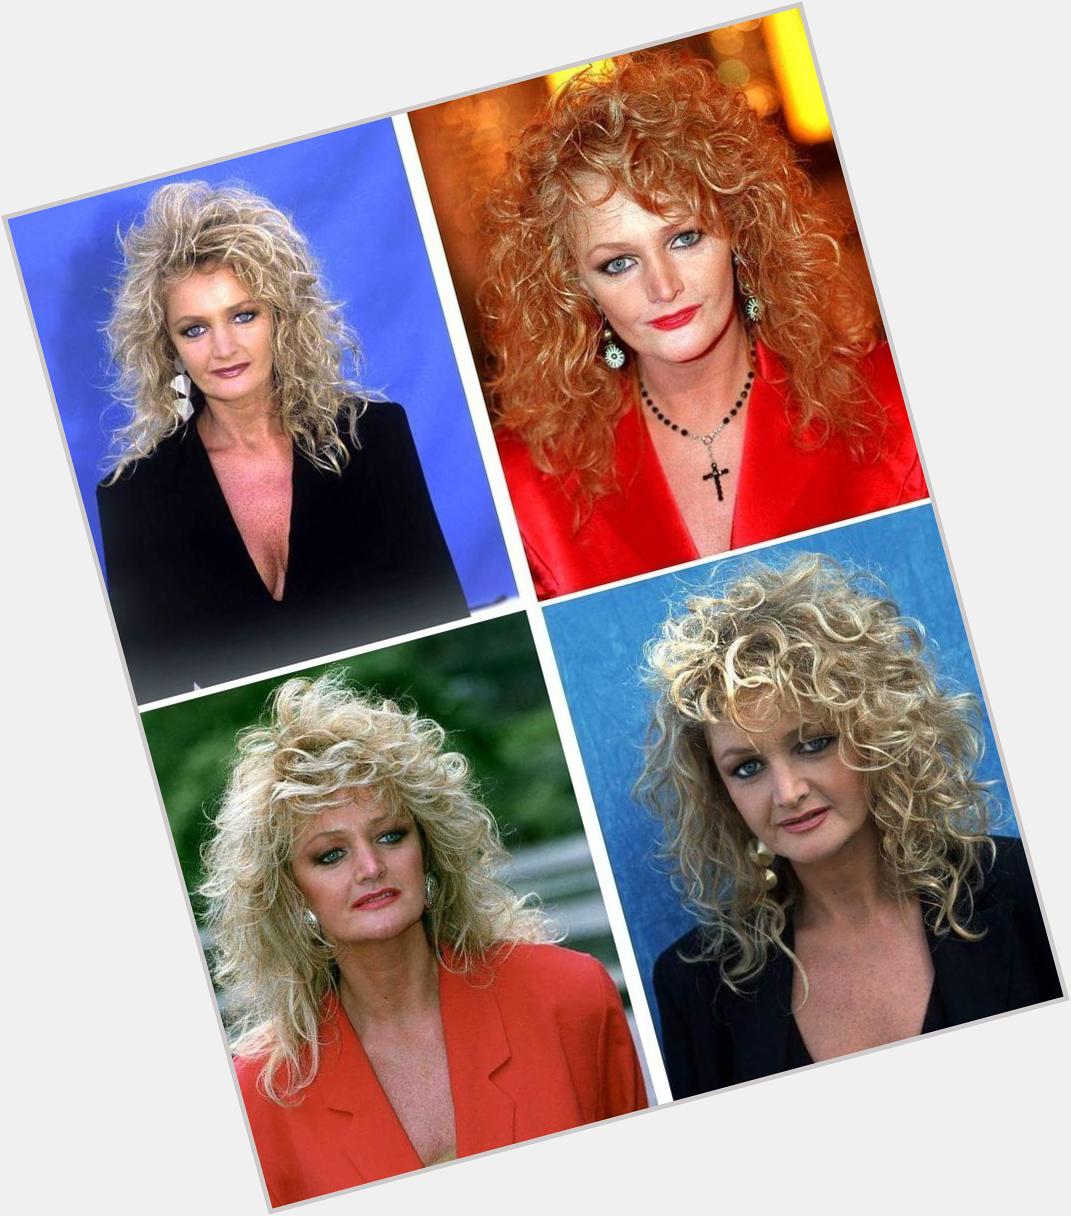 Happy Birthday Bonnie Tyler! From your fans in  Just  